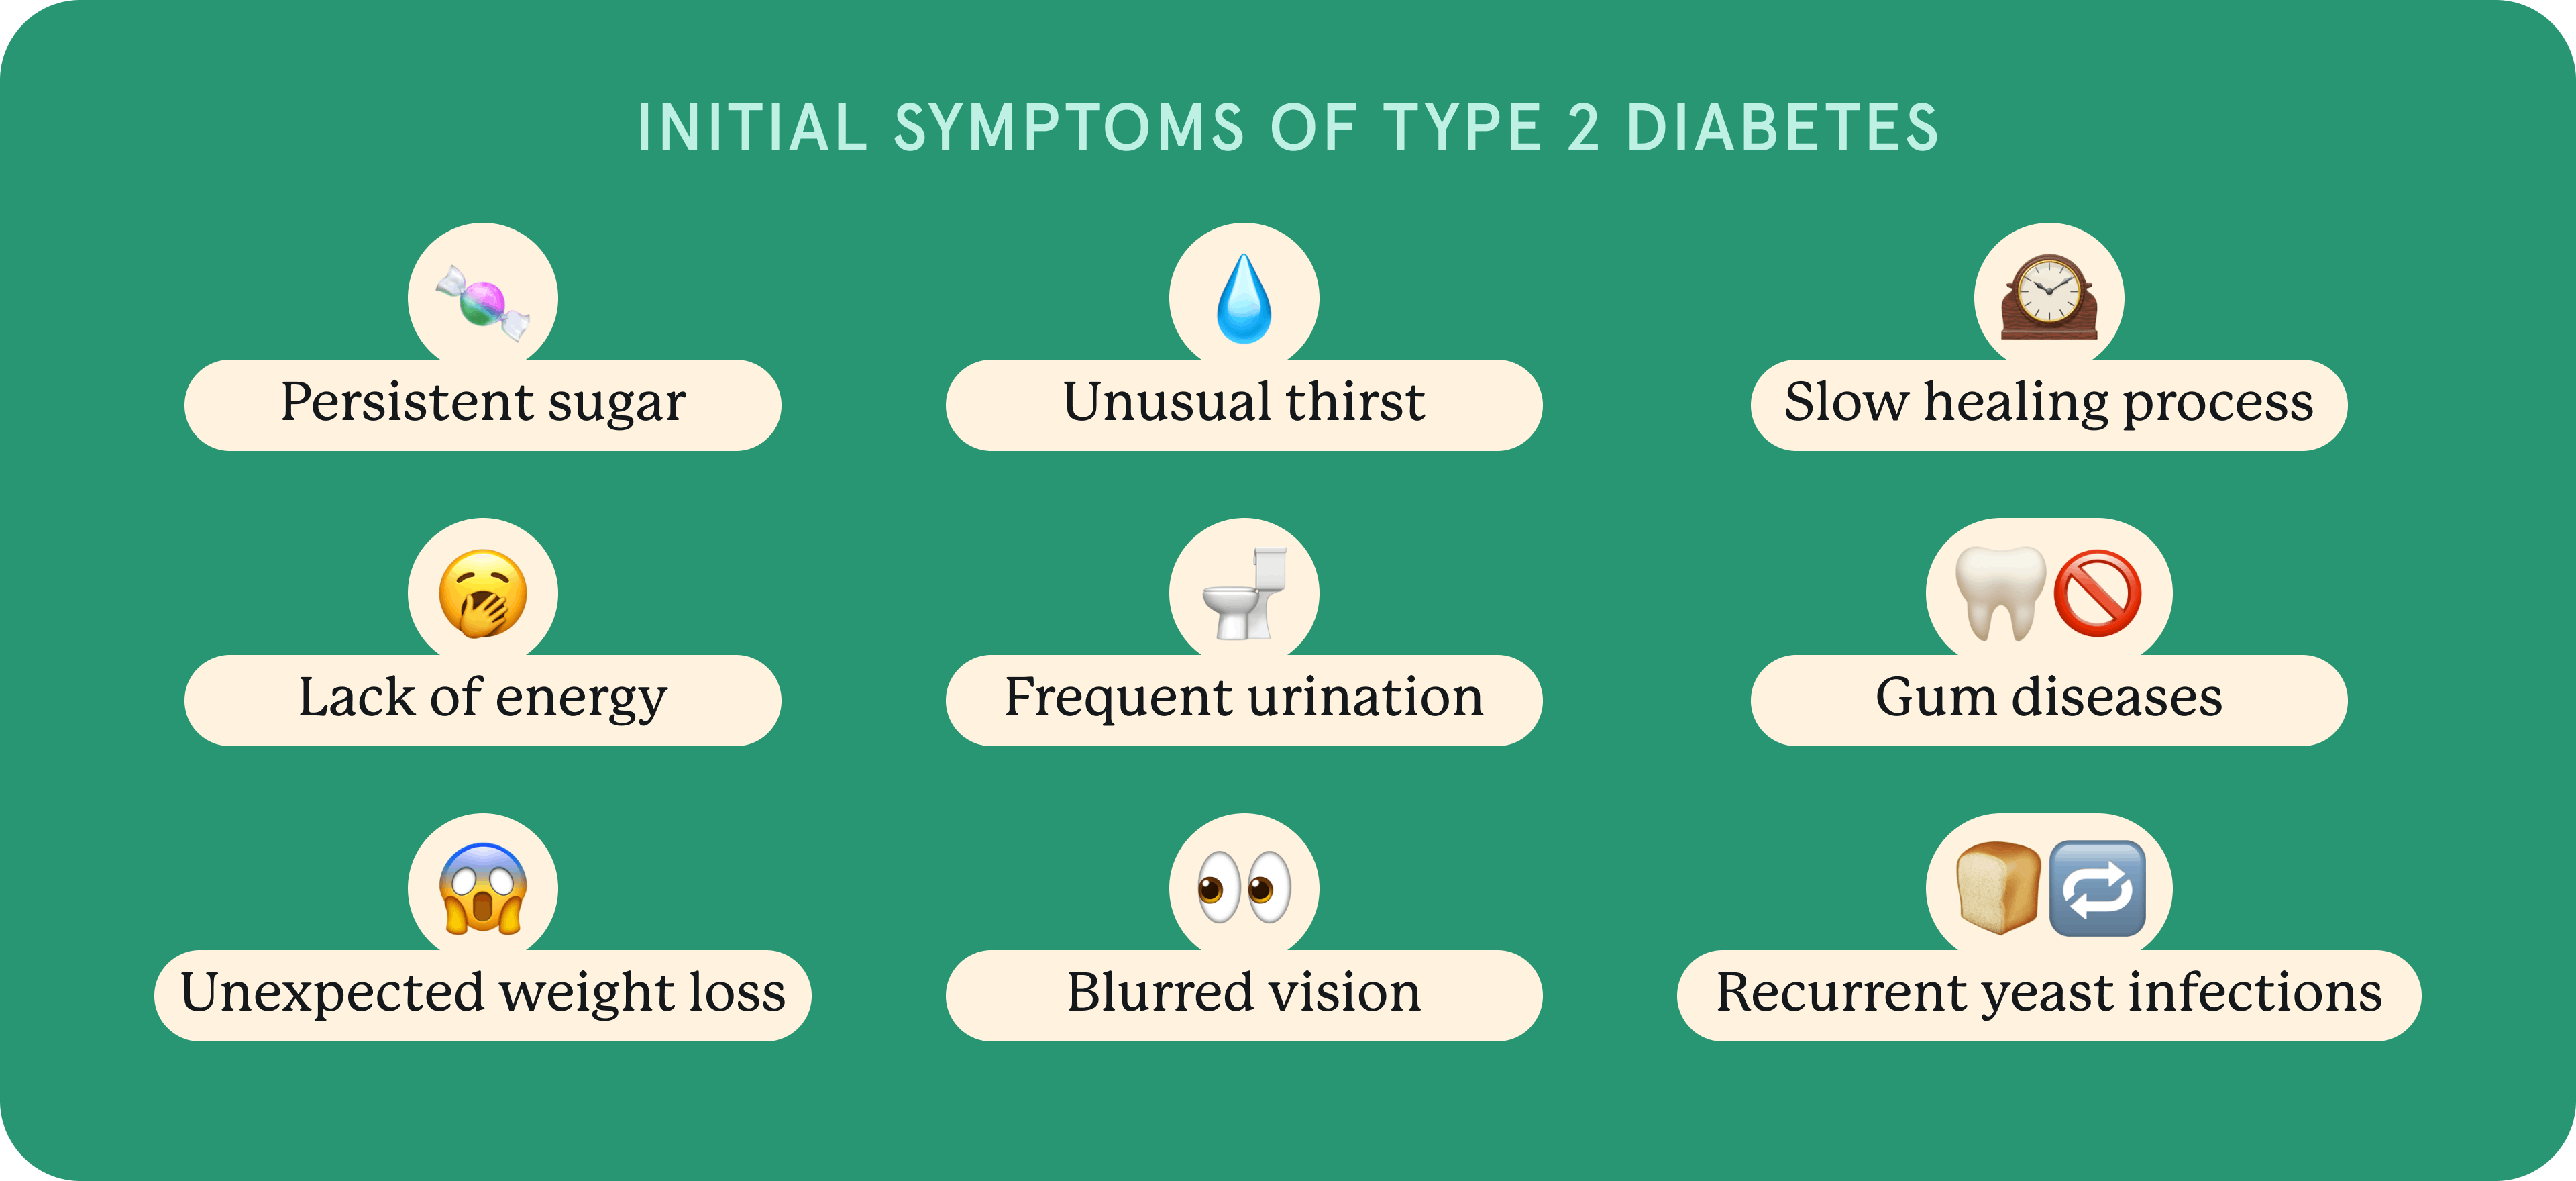 Early symptoms of Type 2 Diabetes often start gradually and can easily be overlooked.